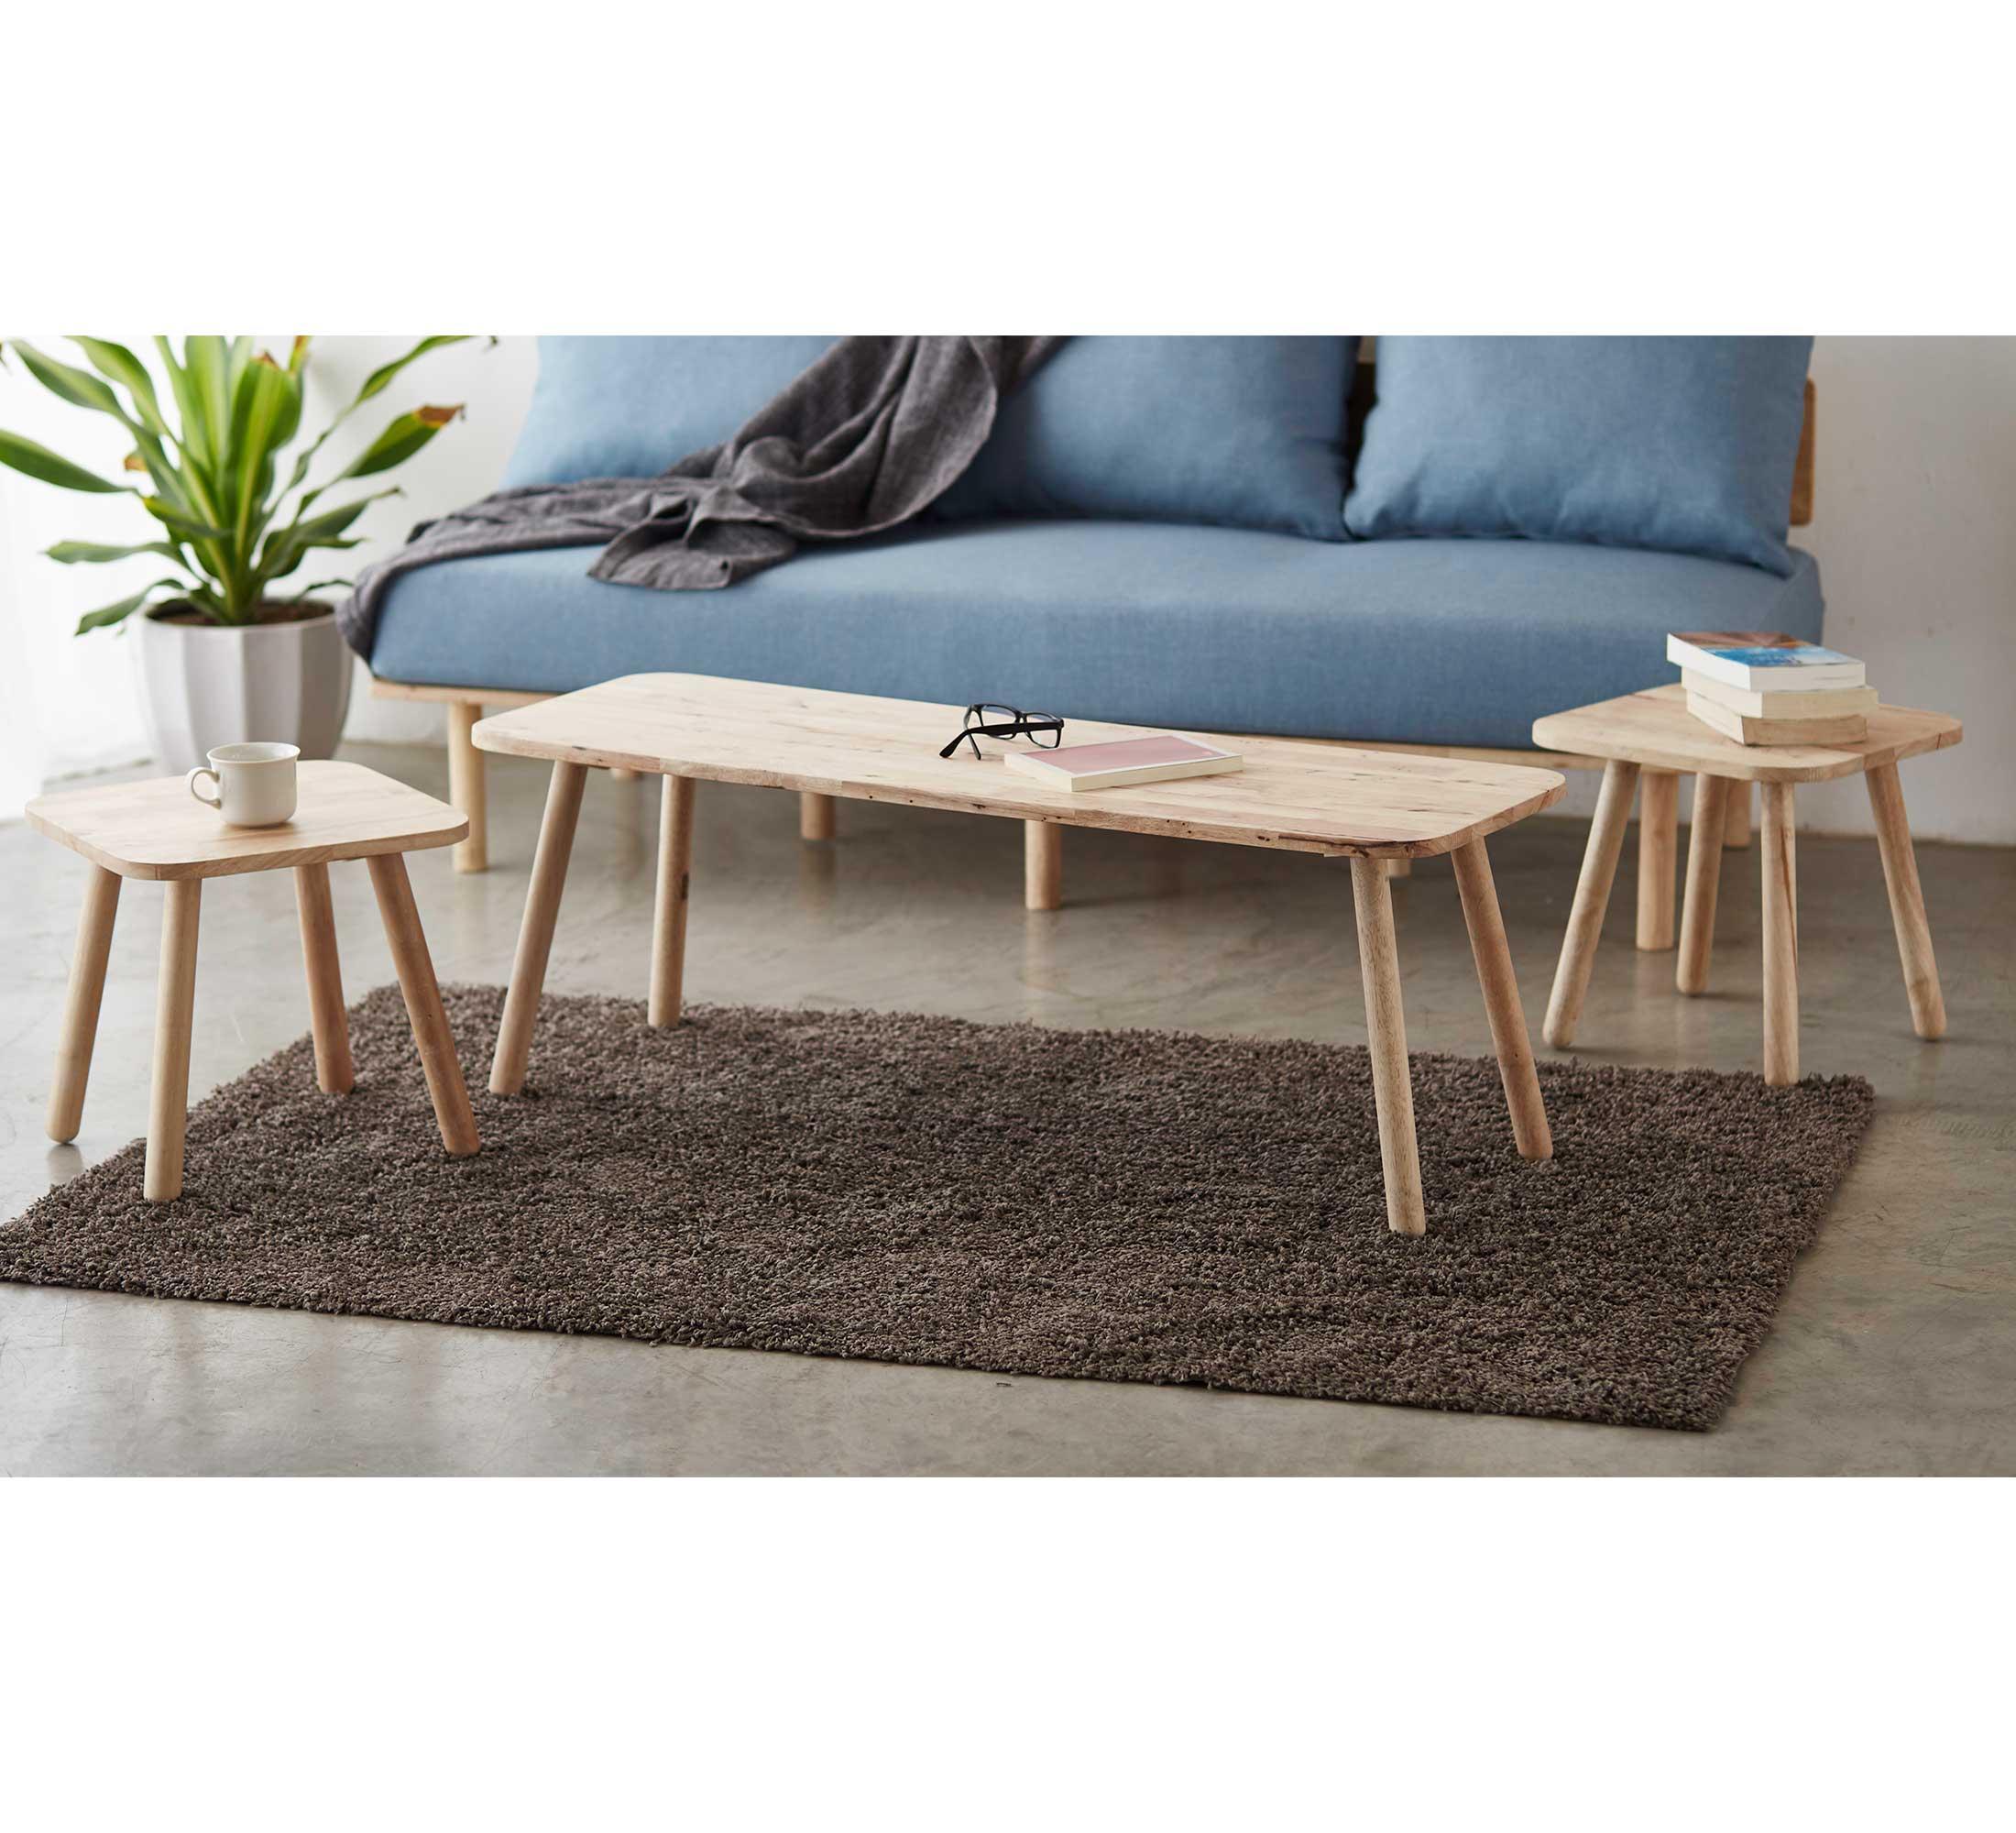 Cricket Coffee Table Set of 3